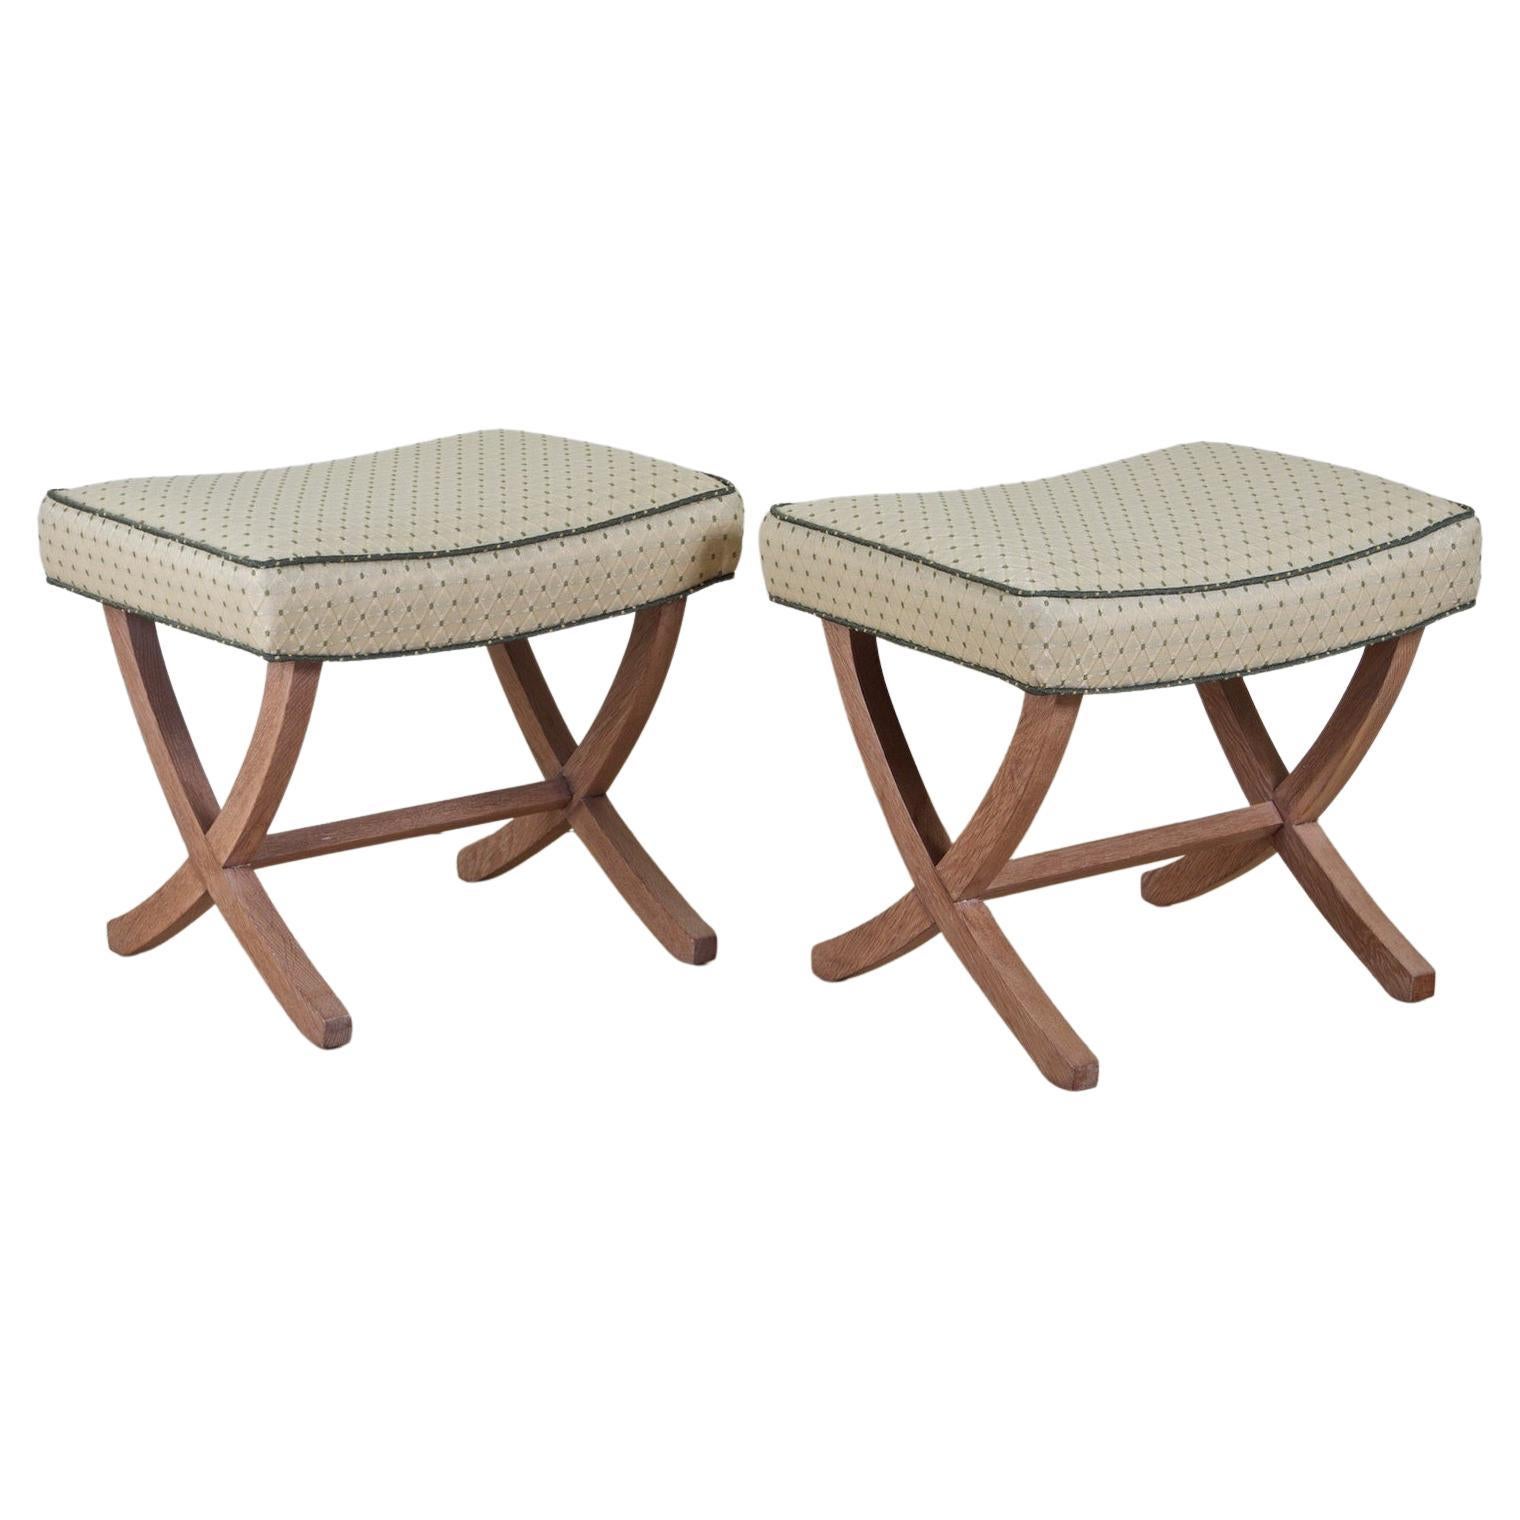 Andre Arbus Pair of Small Benches